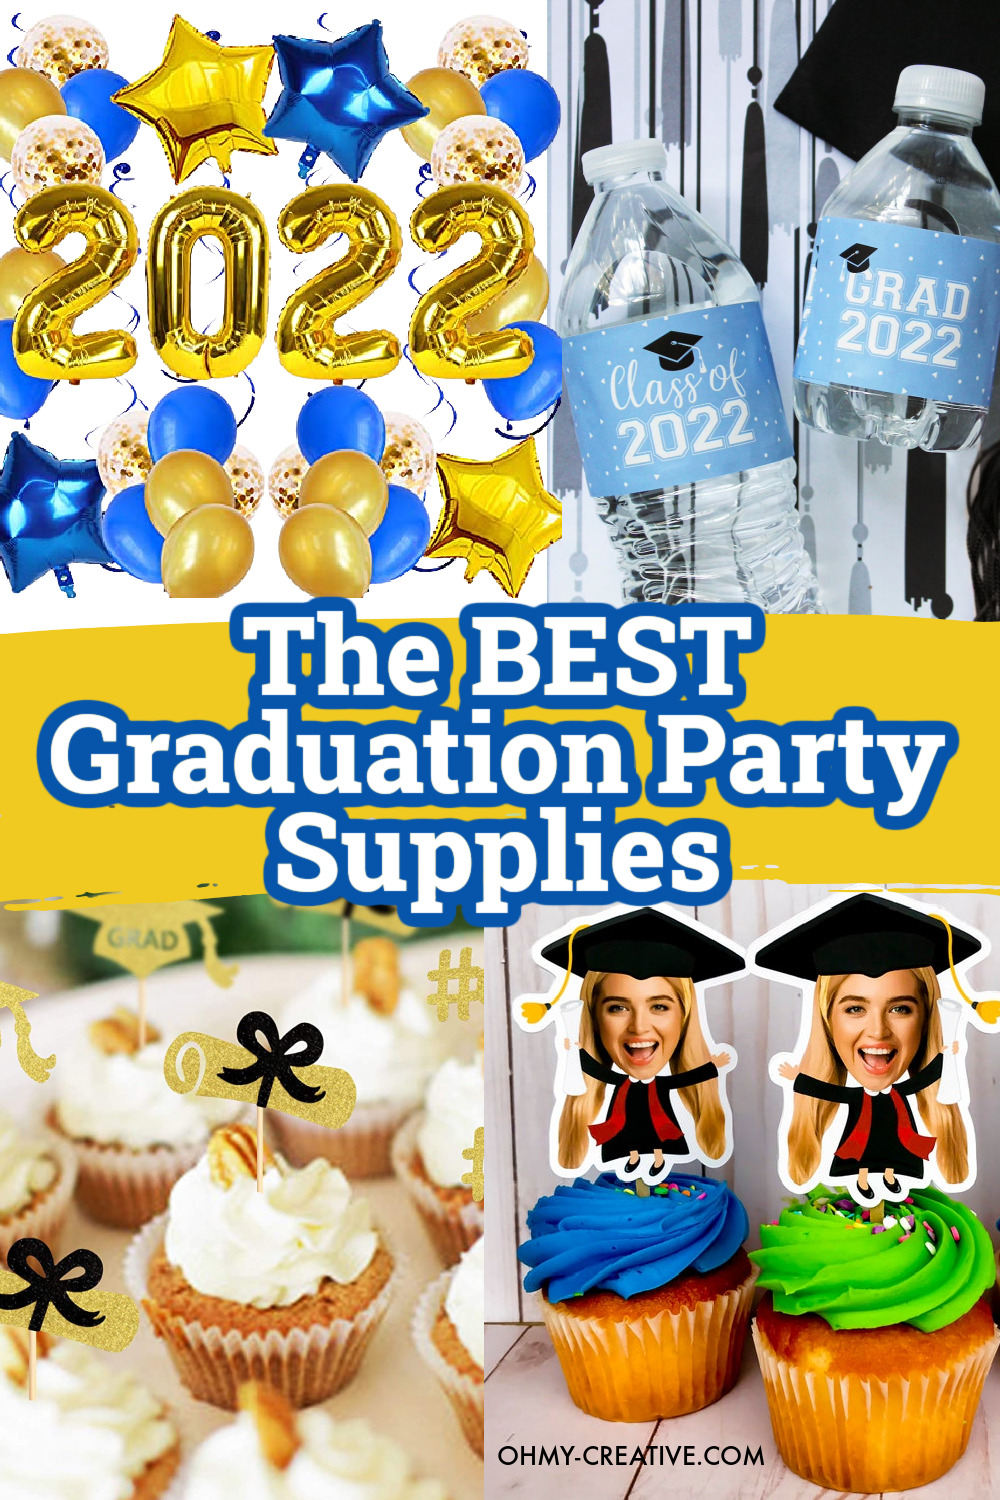 Fabulous Favor Party Pack -100 Pieces Black and White Grad Black and White Graduation Party Favors and Cupcake Kit Best is Yet to Come